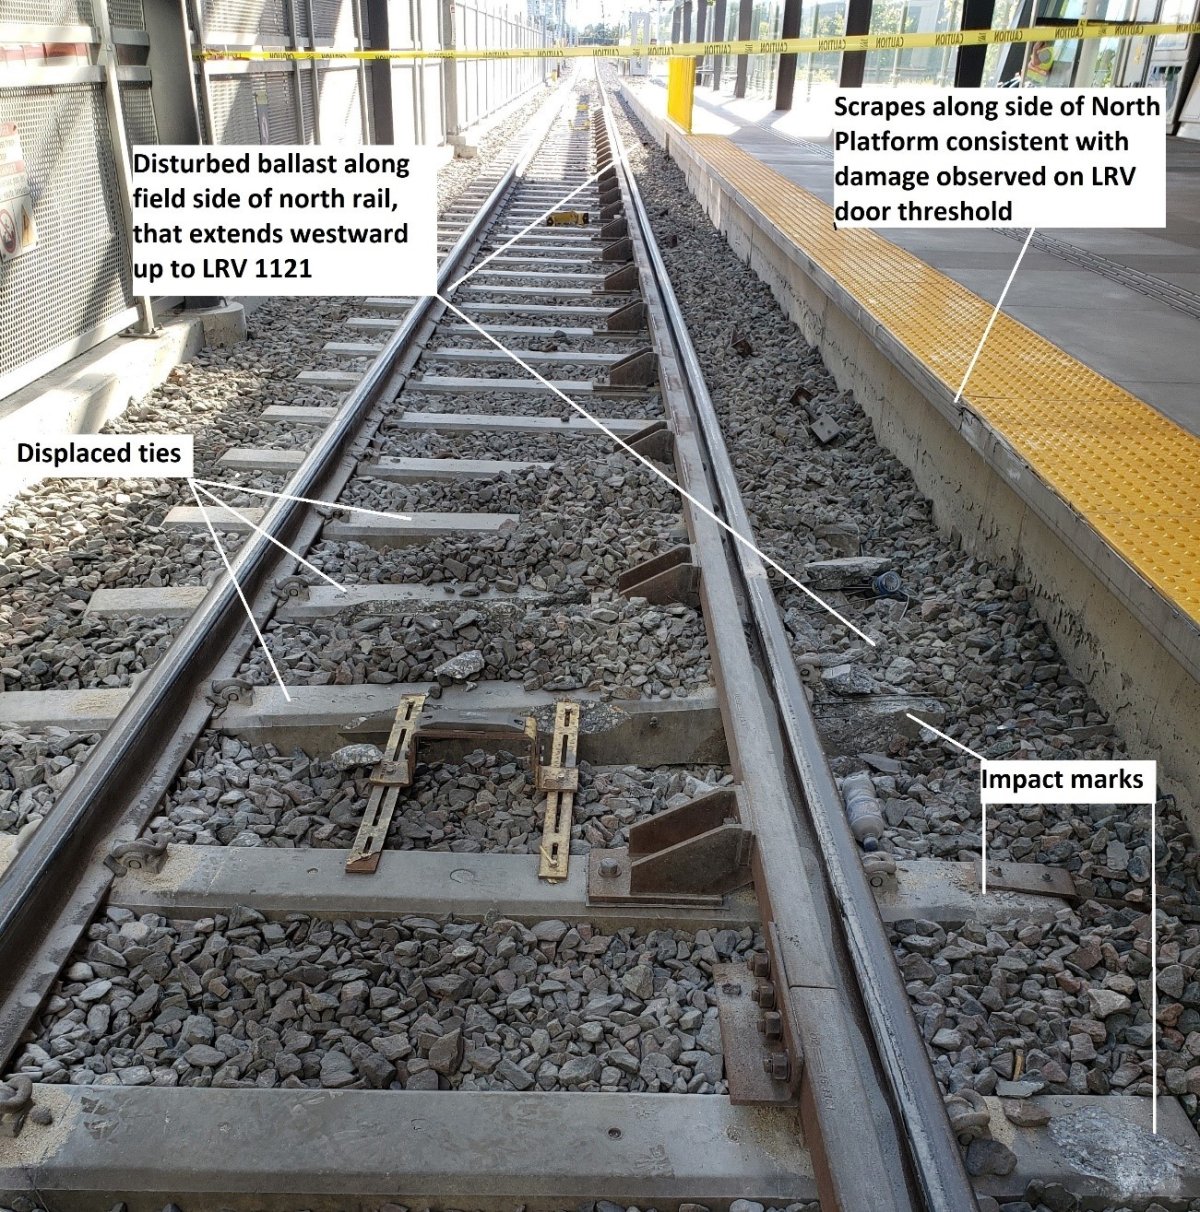 Damage to the northern platform of Tremblay Station is shown in the TSB report on derailment of 19 September 2021.